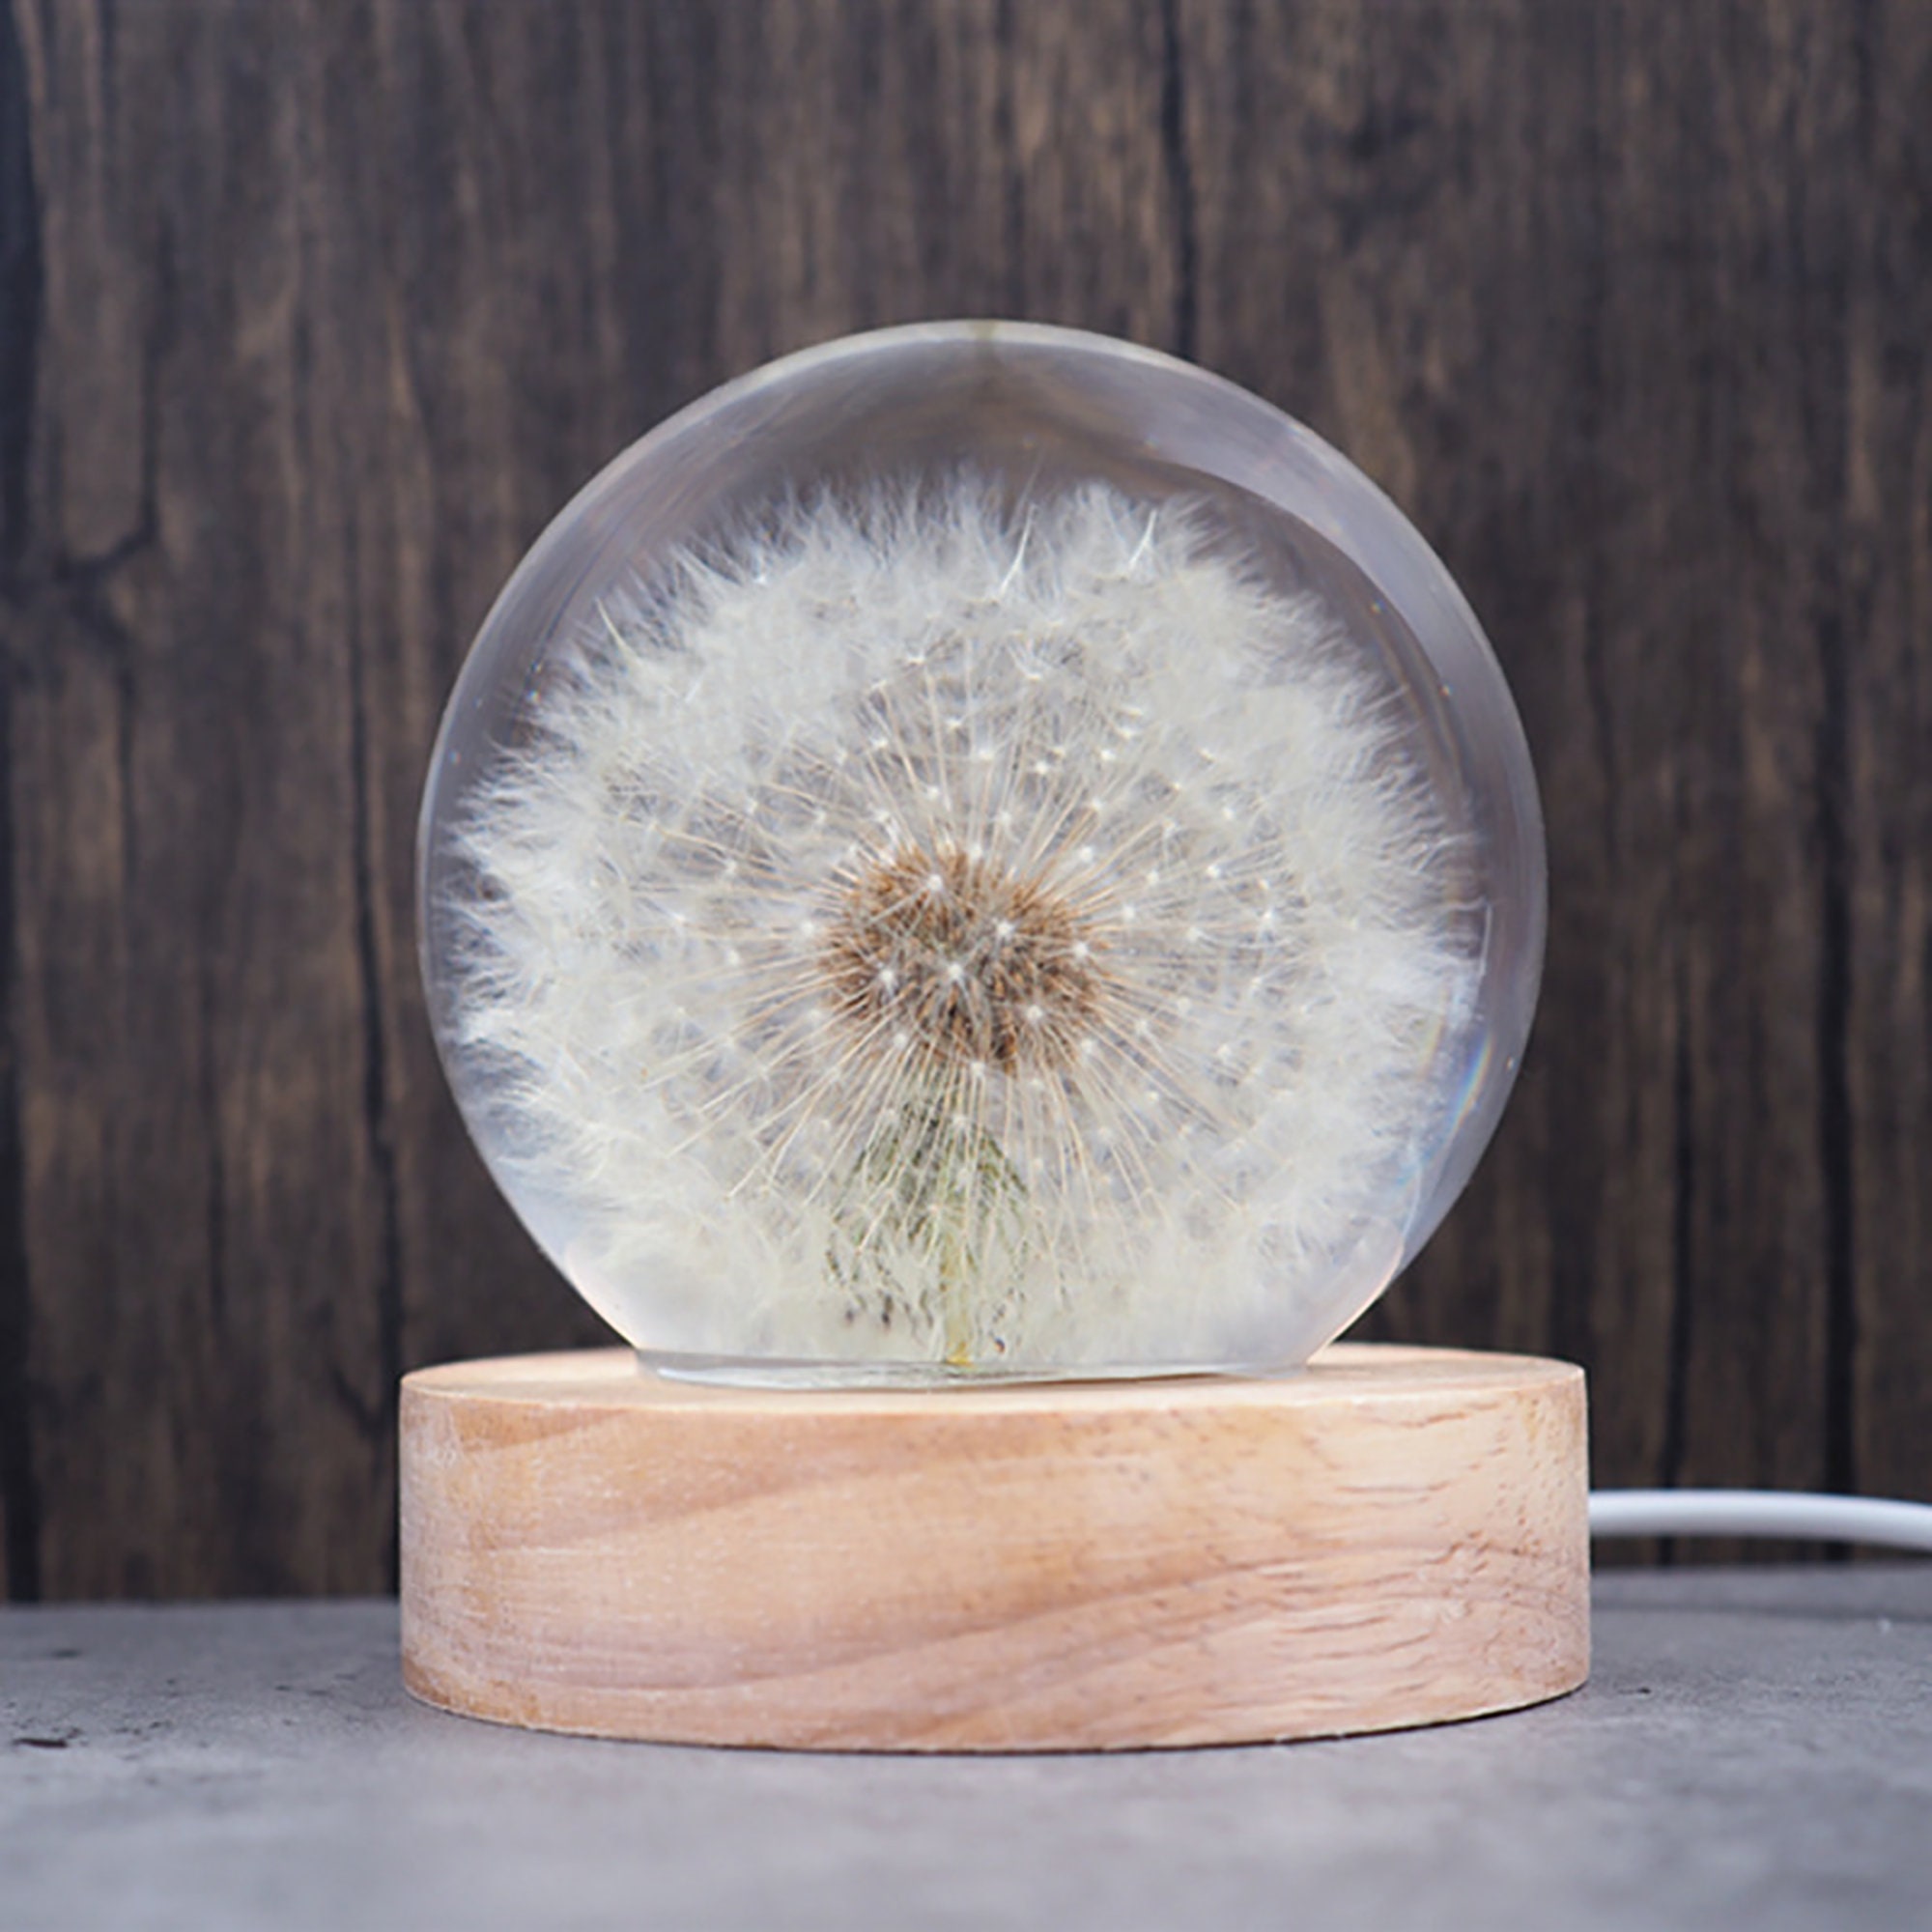 Sphere Silicone Molds Dandelion Crystal Ball Table Lamp Decoration-A One-piece Round Ball Crystal Ball Night Light Mirror Silicone Mold Set DIY Crystal Epoxy Resin Ball Molds 